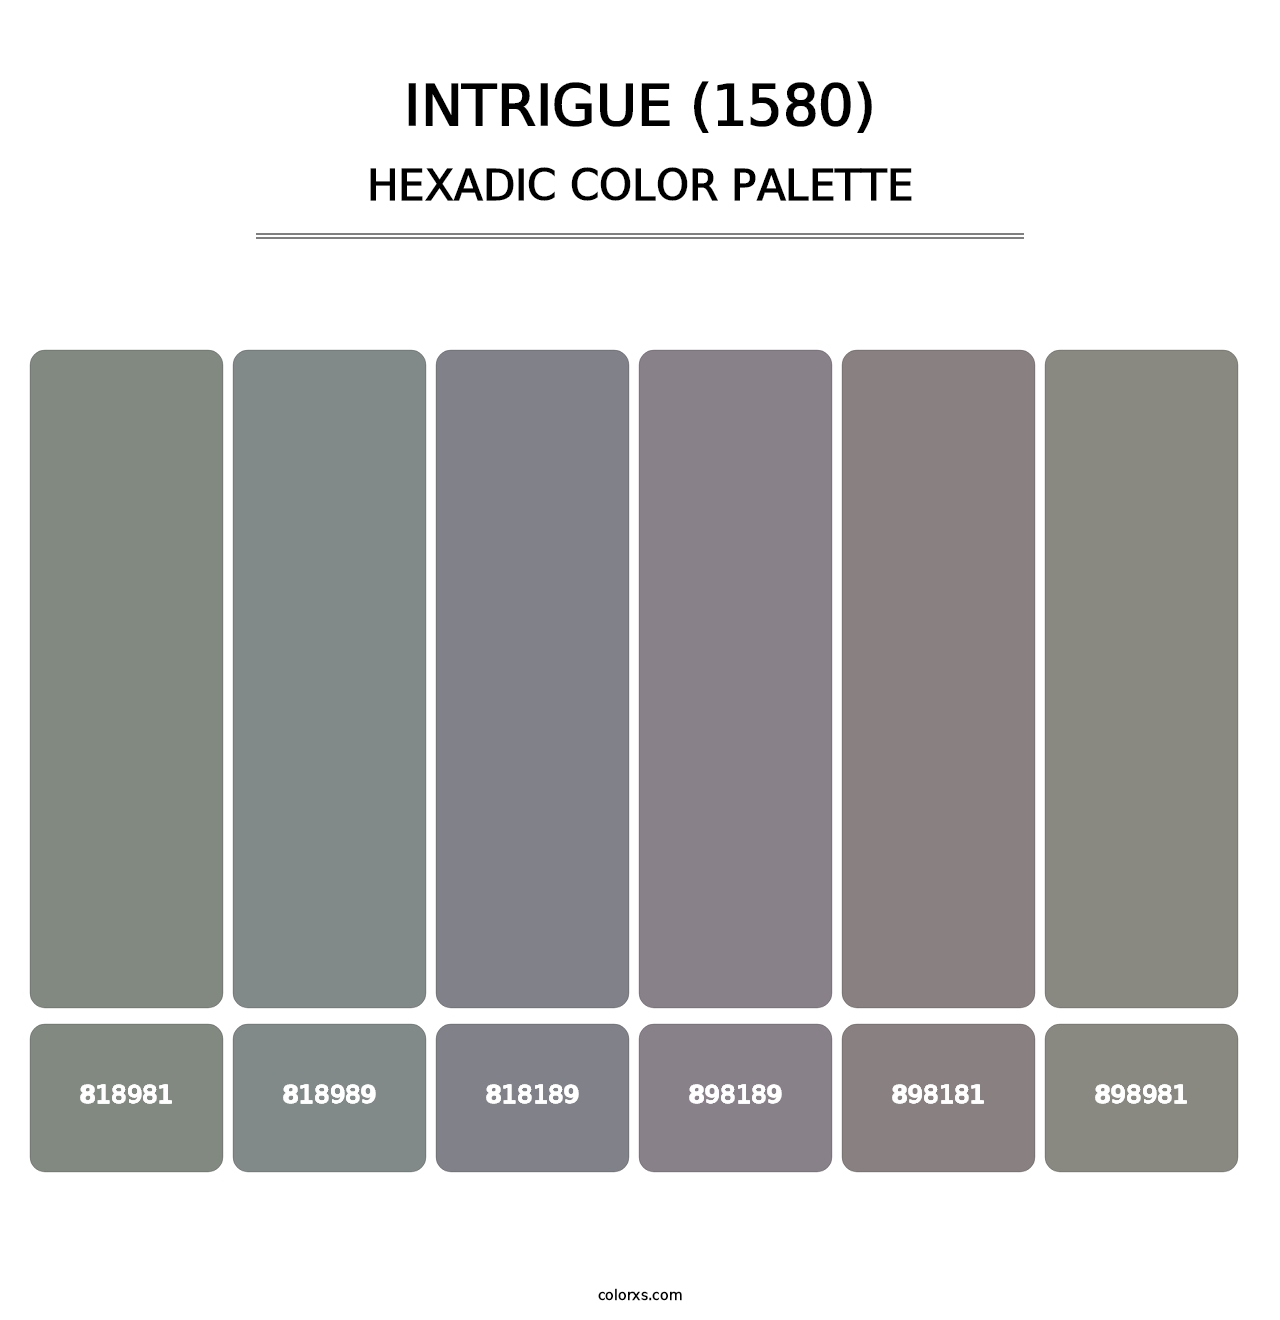 Intrigue (1580) - Hexadic Color Palette